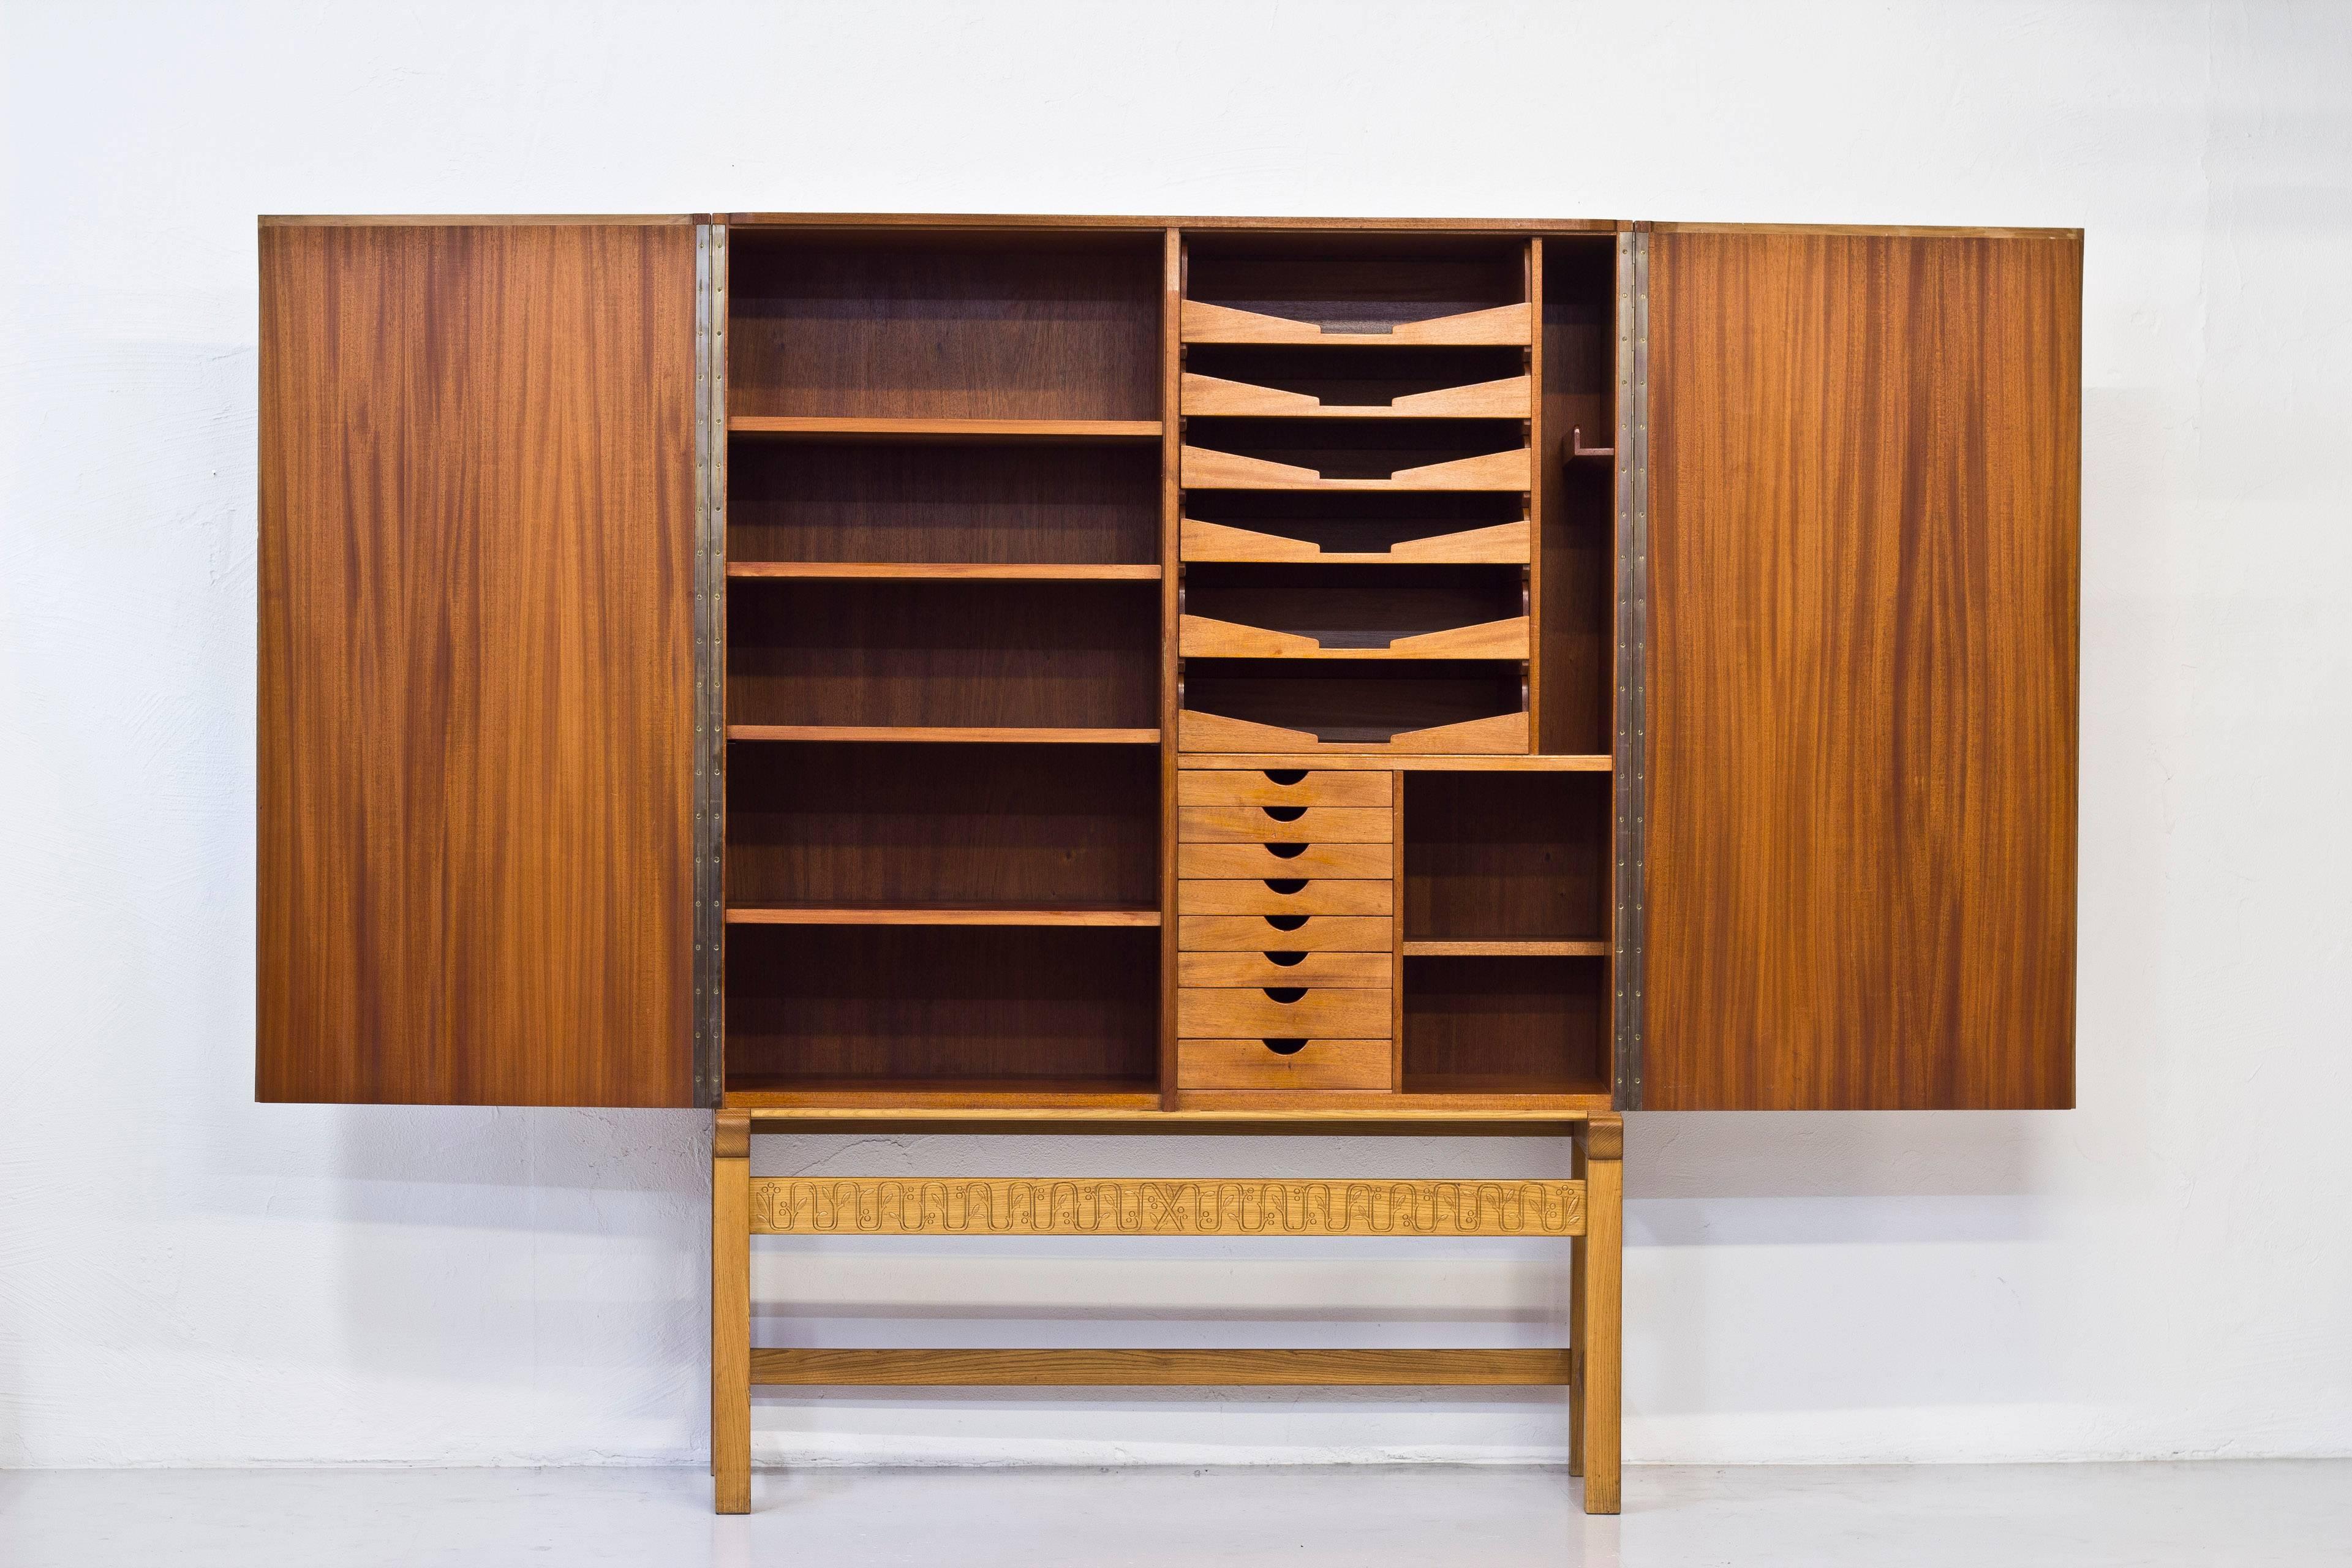 Unique cabinet designed by Architect David Nilsson and performed by master cabinet maker Gustaf Bouvin in 1942.  Massive cabinet standing on a base of solid oak with the outside of the cabinet made from pear wood. Inside in mahogany with adjustable